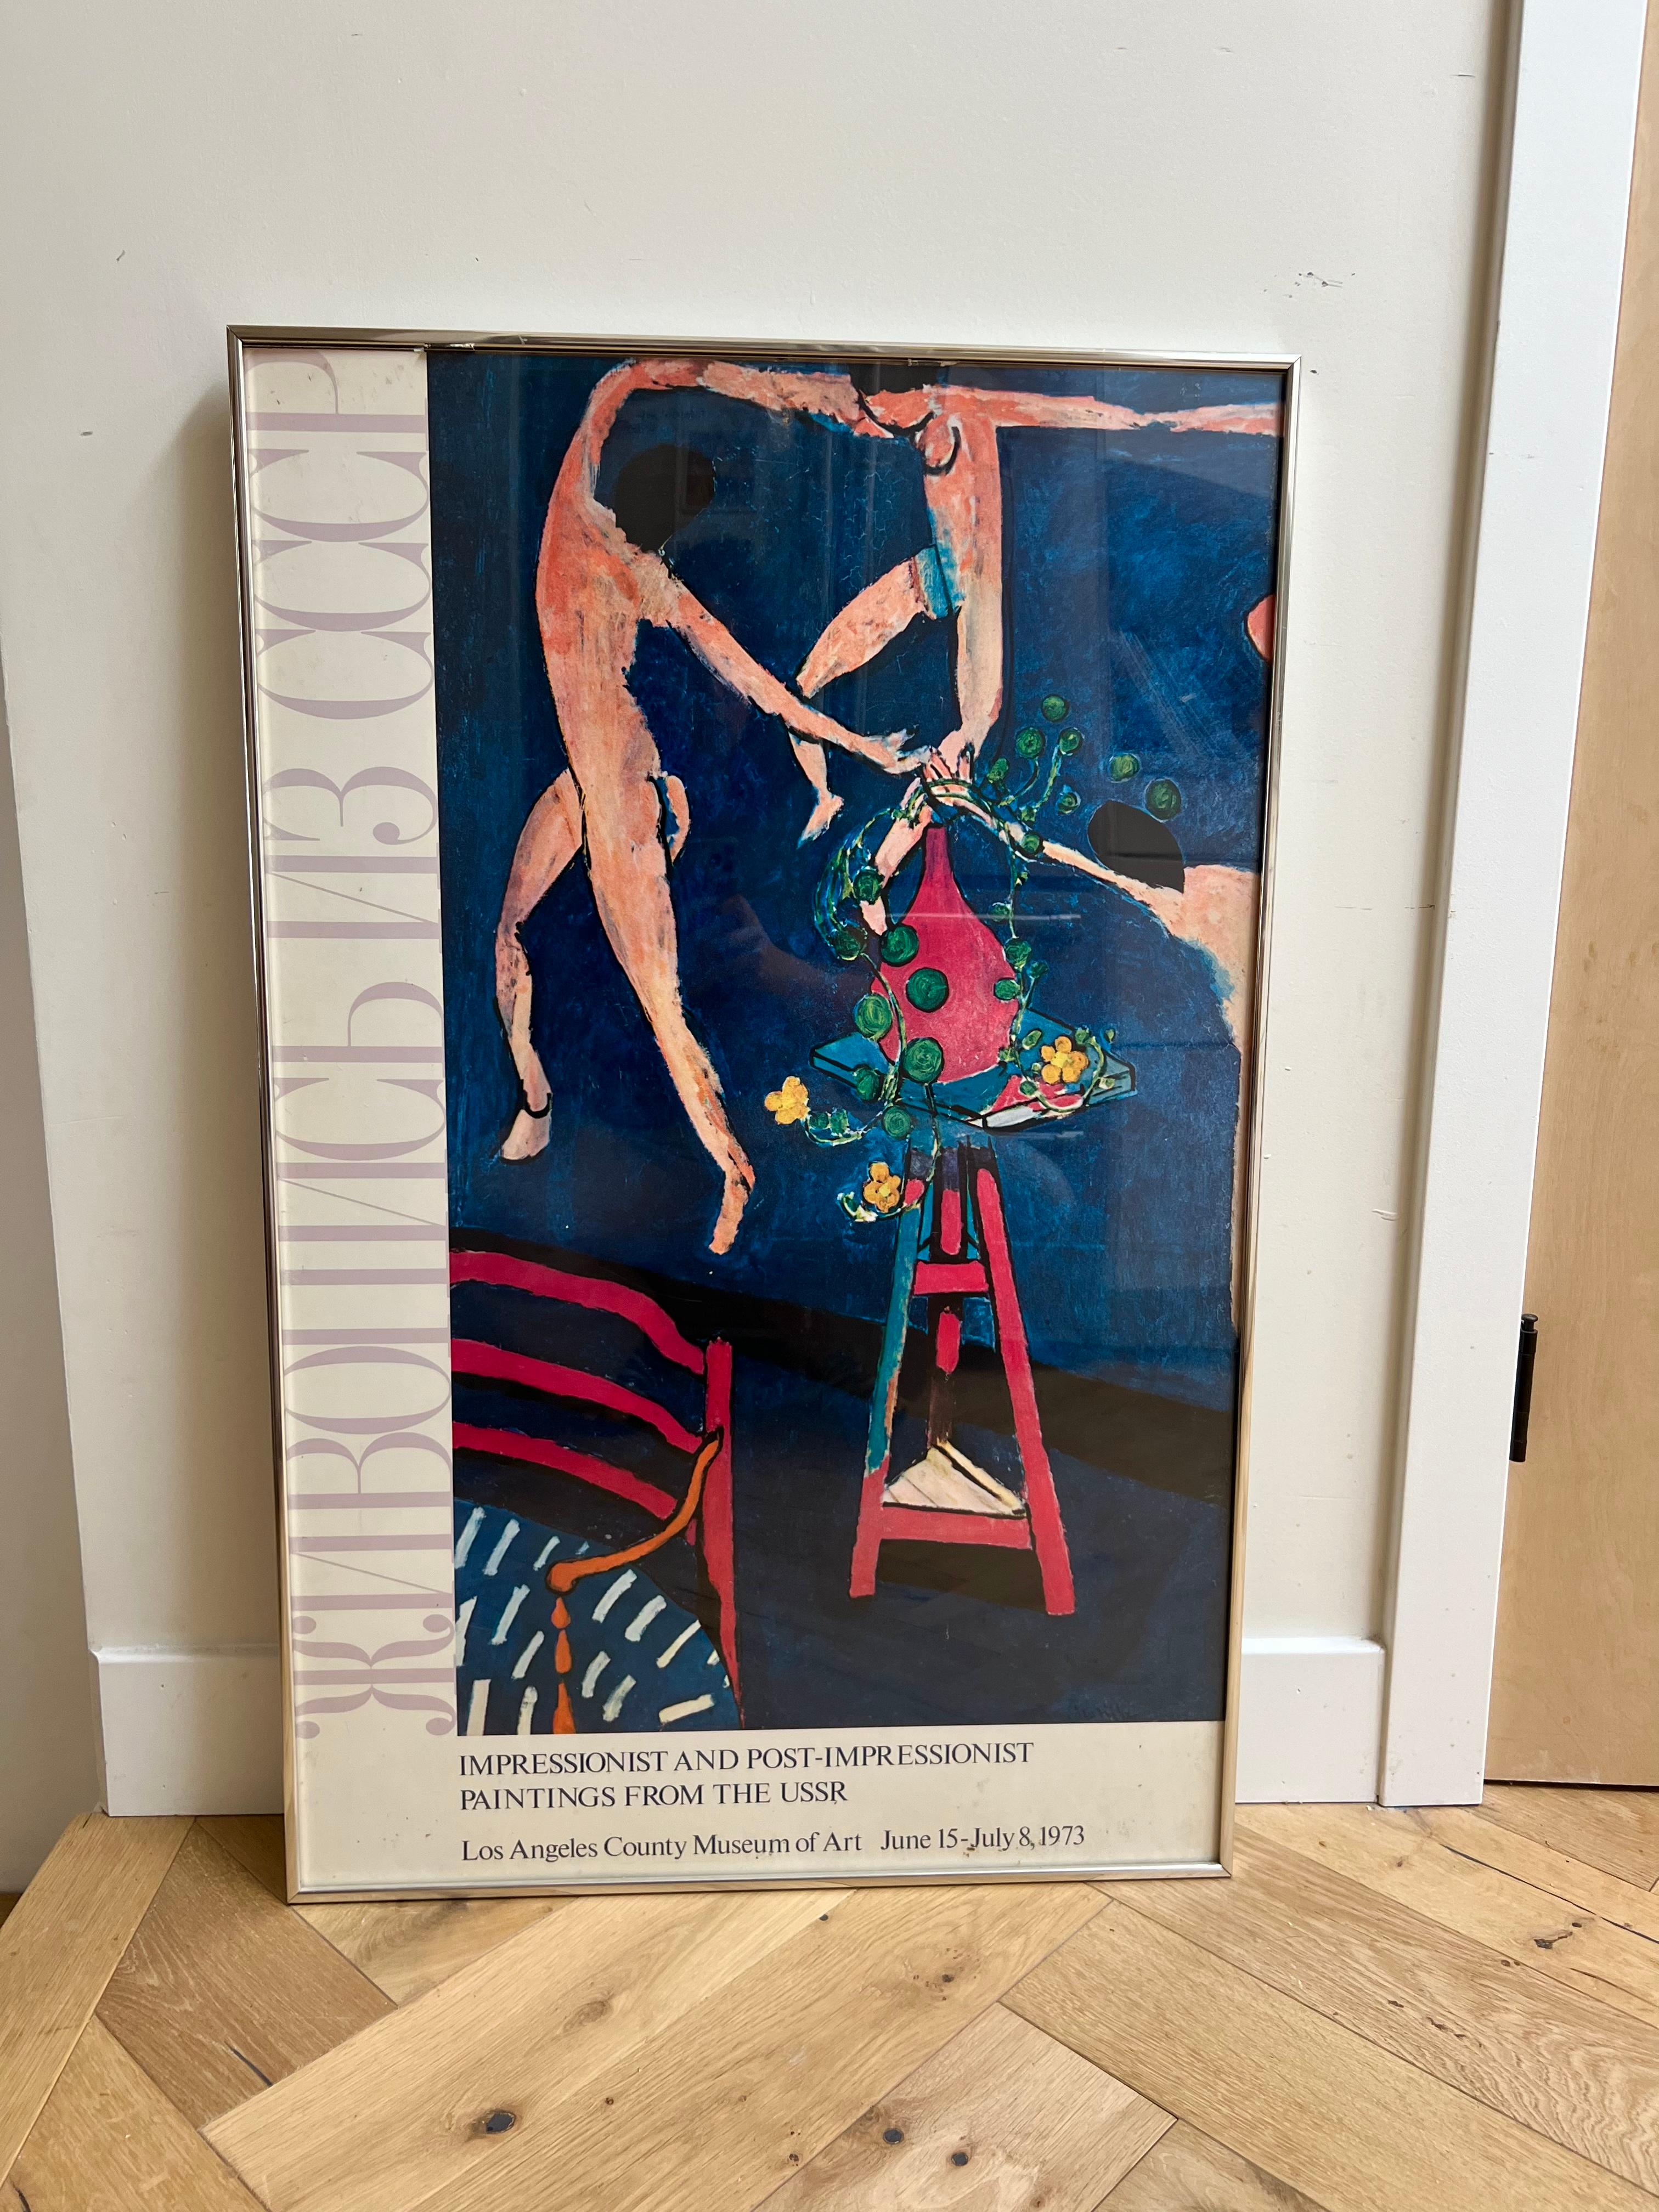 A very rare vintage exhibition poster from the Los Angeles County Museum of Art (LACMA): « Impressionist and Post-Impressionist Paintings from the USSR », 1973. Featuring « Nasturtiums With Dance » by Matisse. Framed in a metal frame (titanium) and